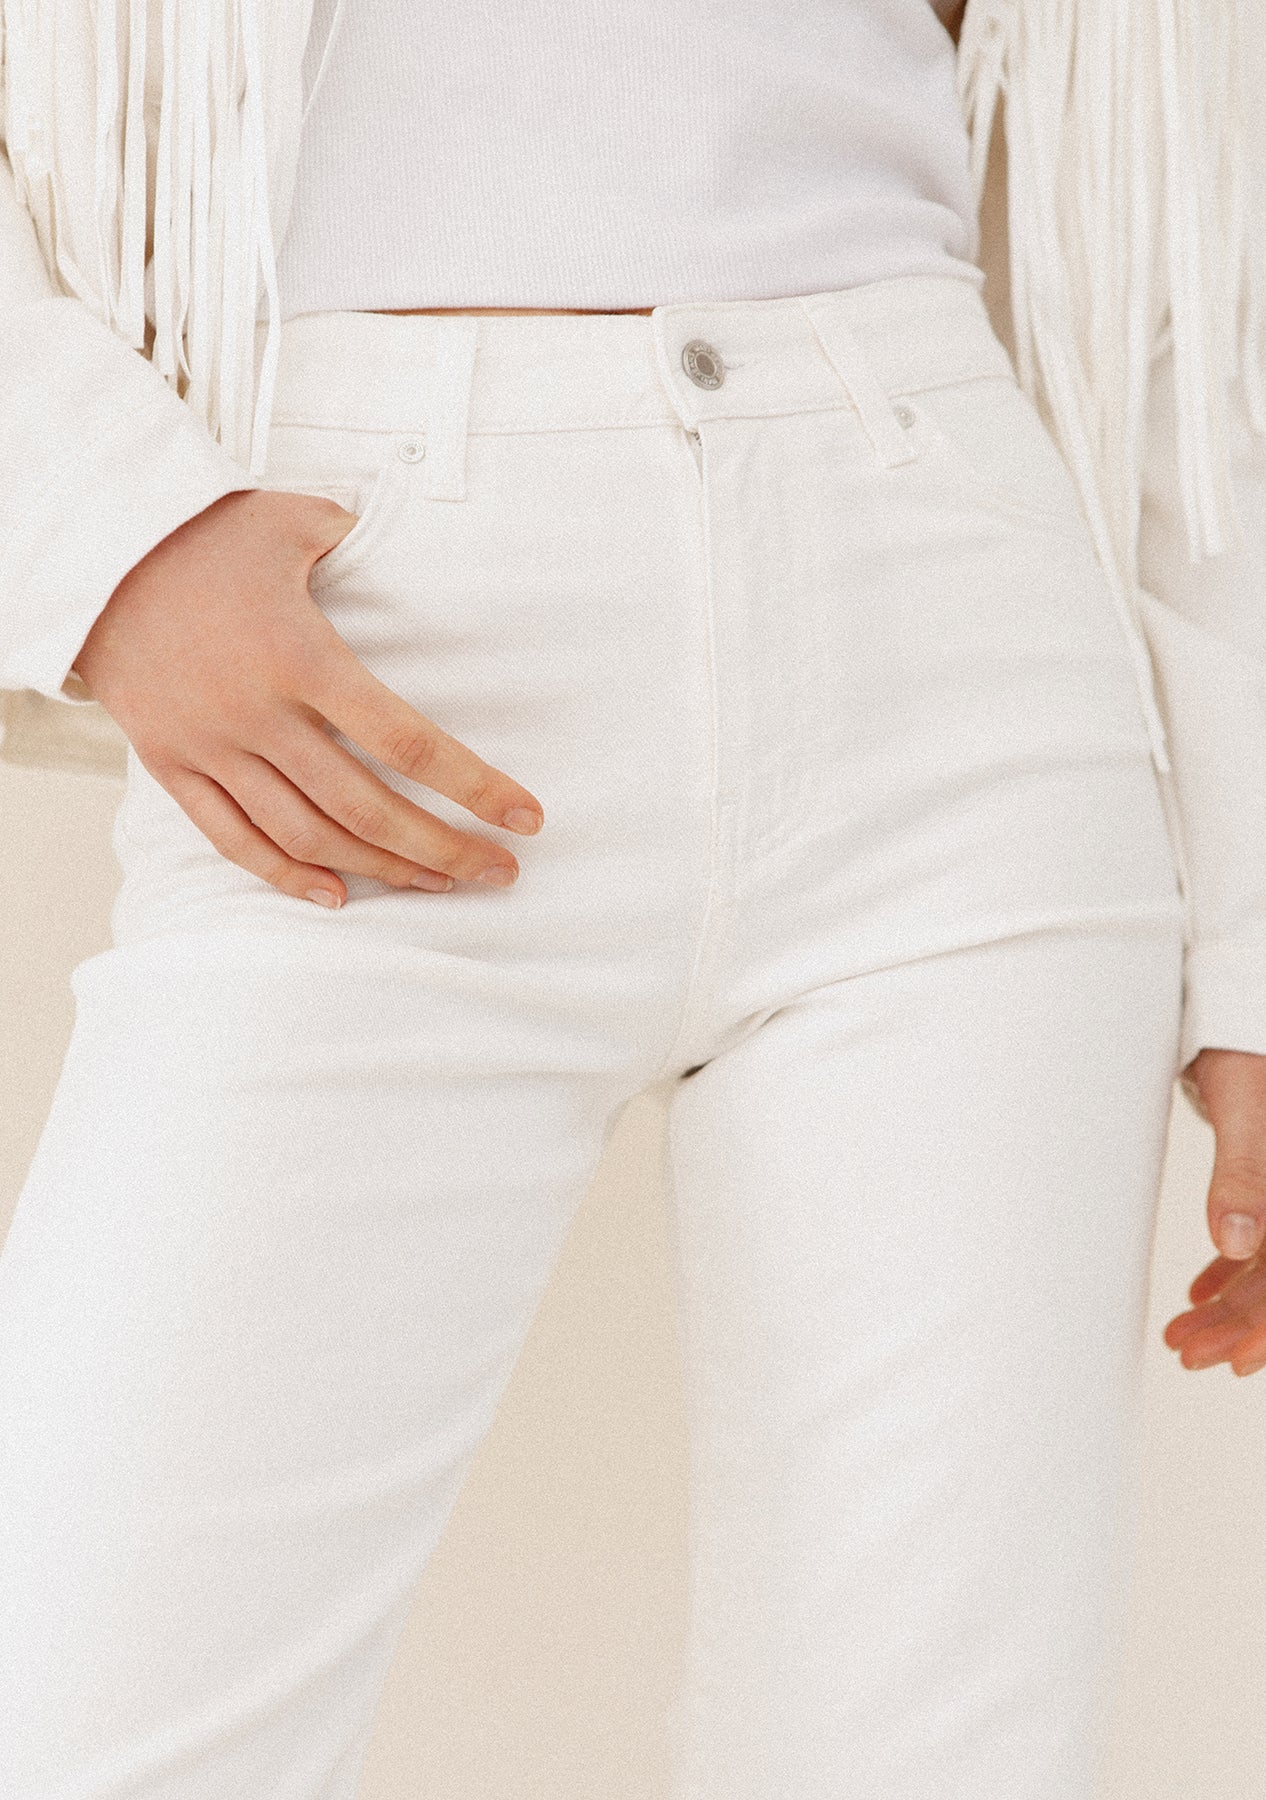 Scoop High-Rise Flare Angled Step Hem Jeans, Did You Hear? Walmart Denim  Is Insanely Popular — Shop 19 Styles We're Obsessing Over